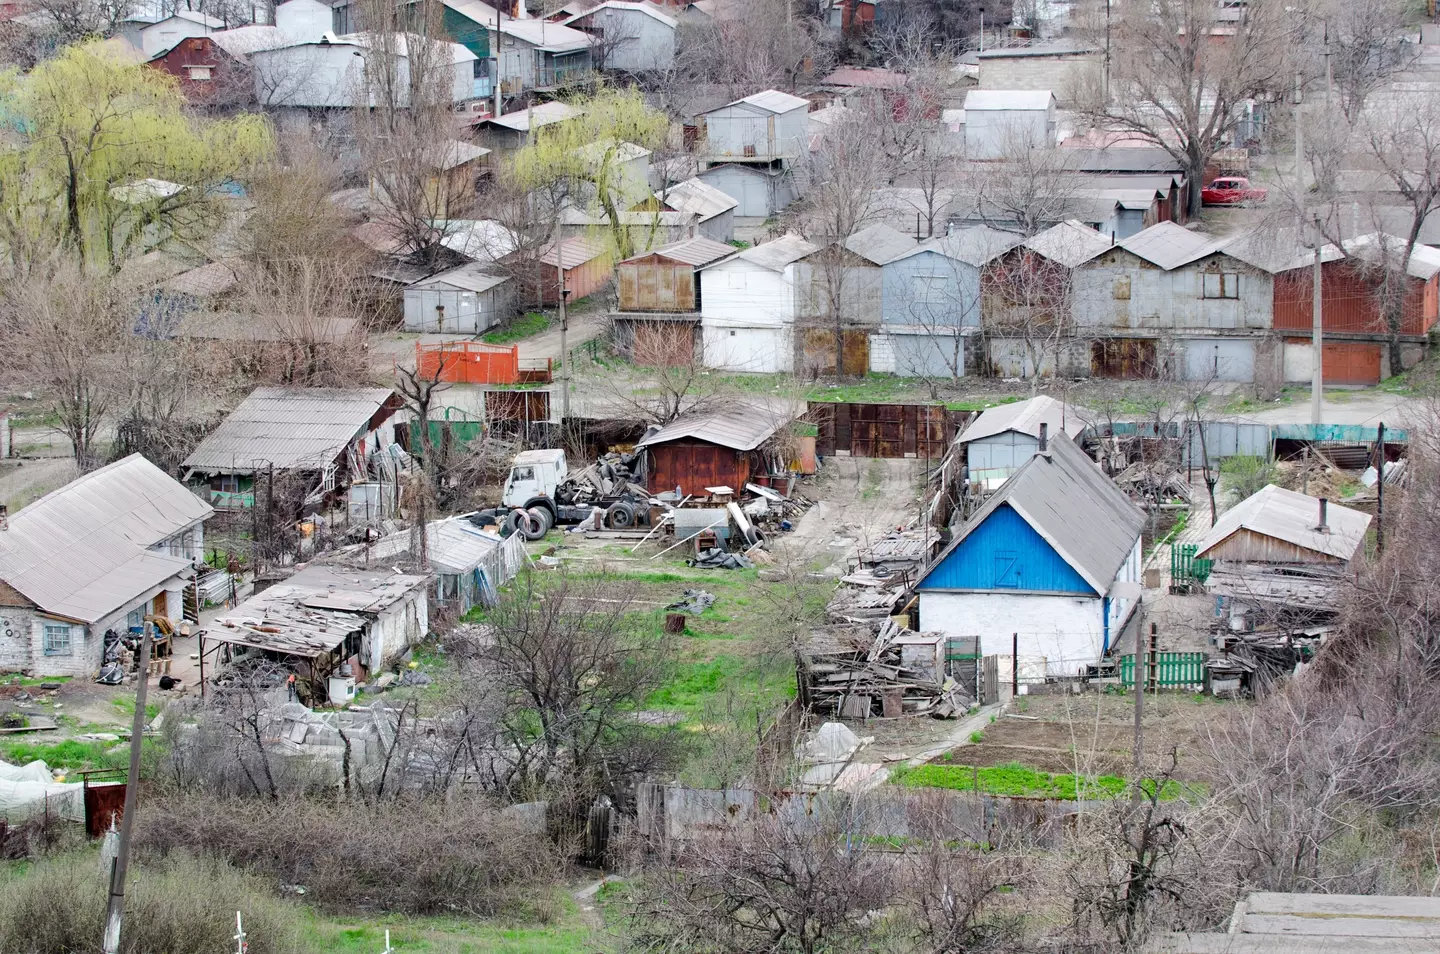 10,000 civilians are estimated to have been killed in Mariupol so far.